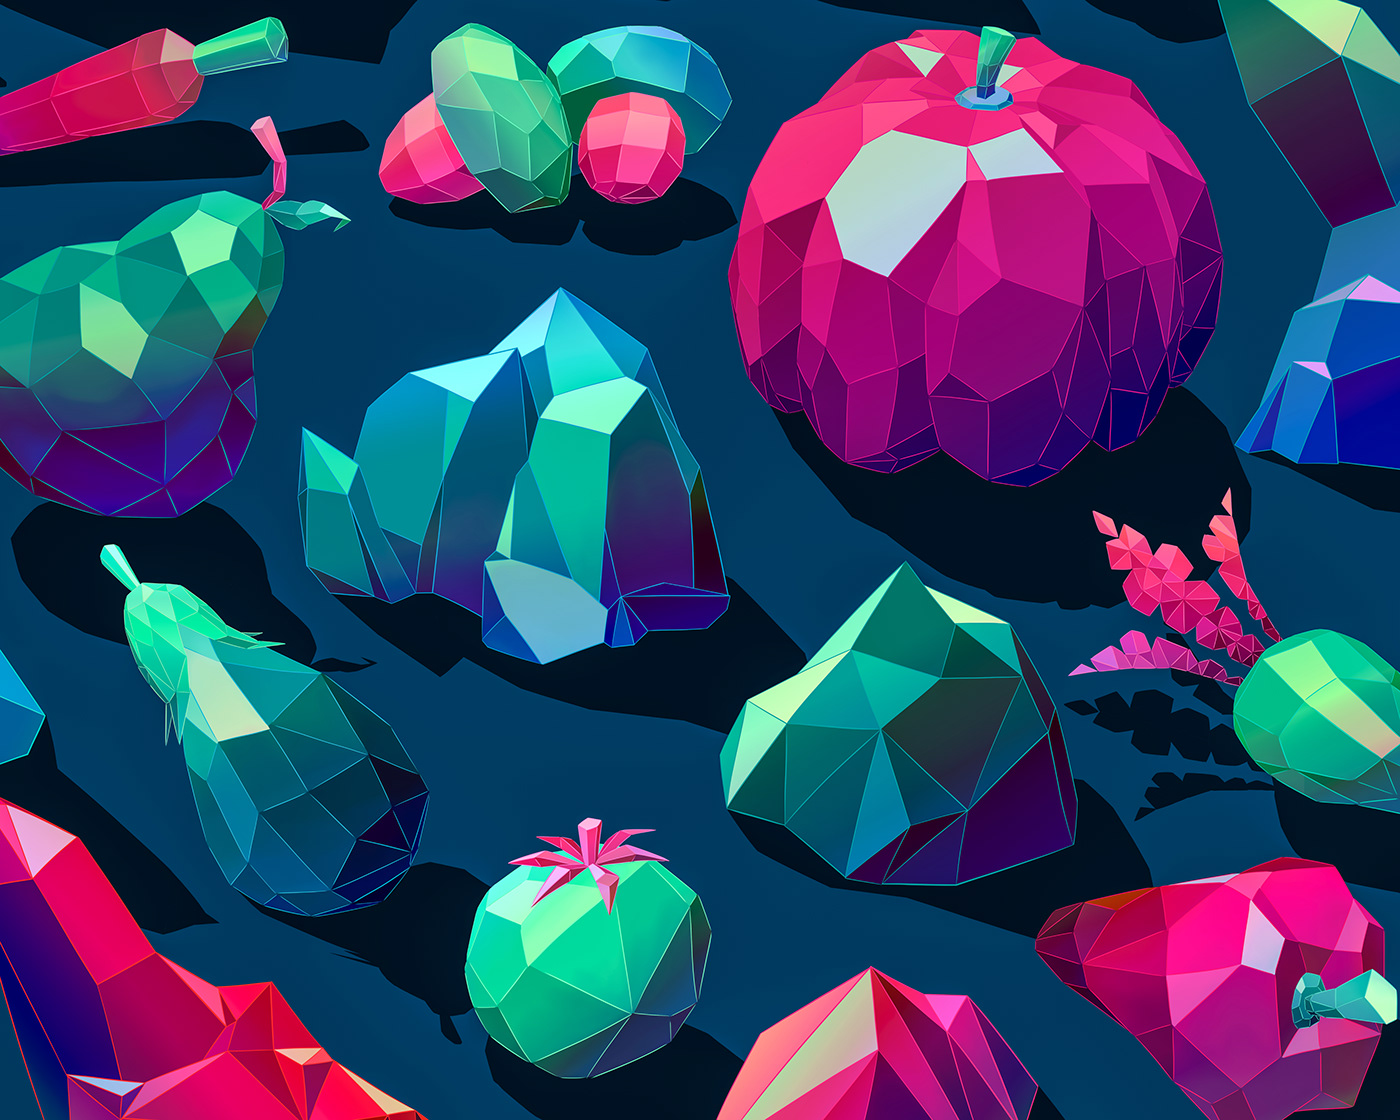 Digital art depicting low-poly 3D fruits, vegetables and crystals in cool-toned neon colours.